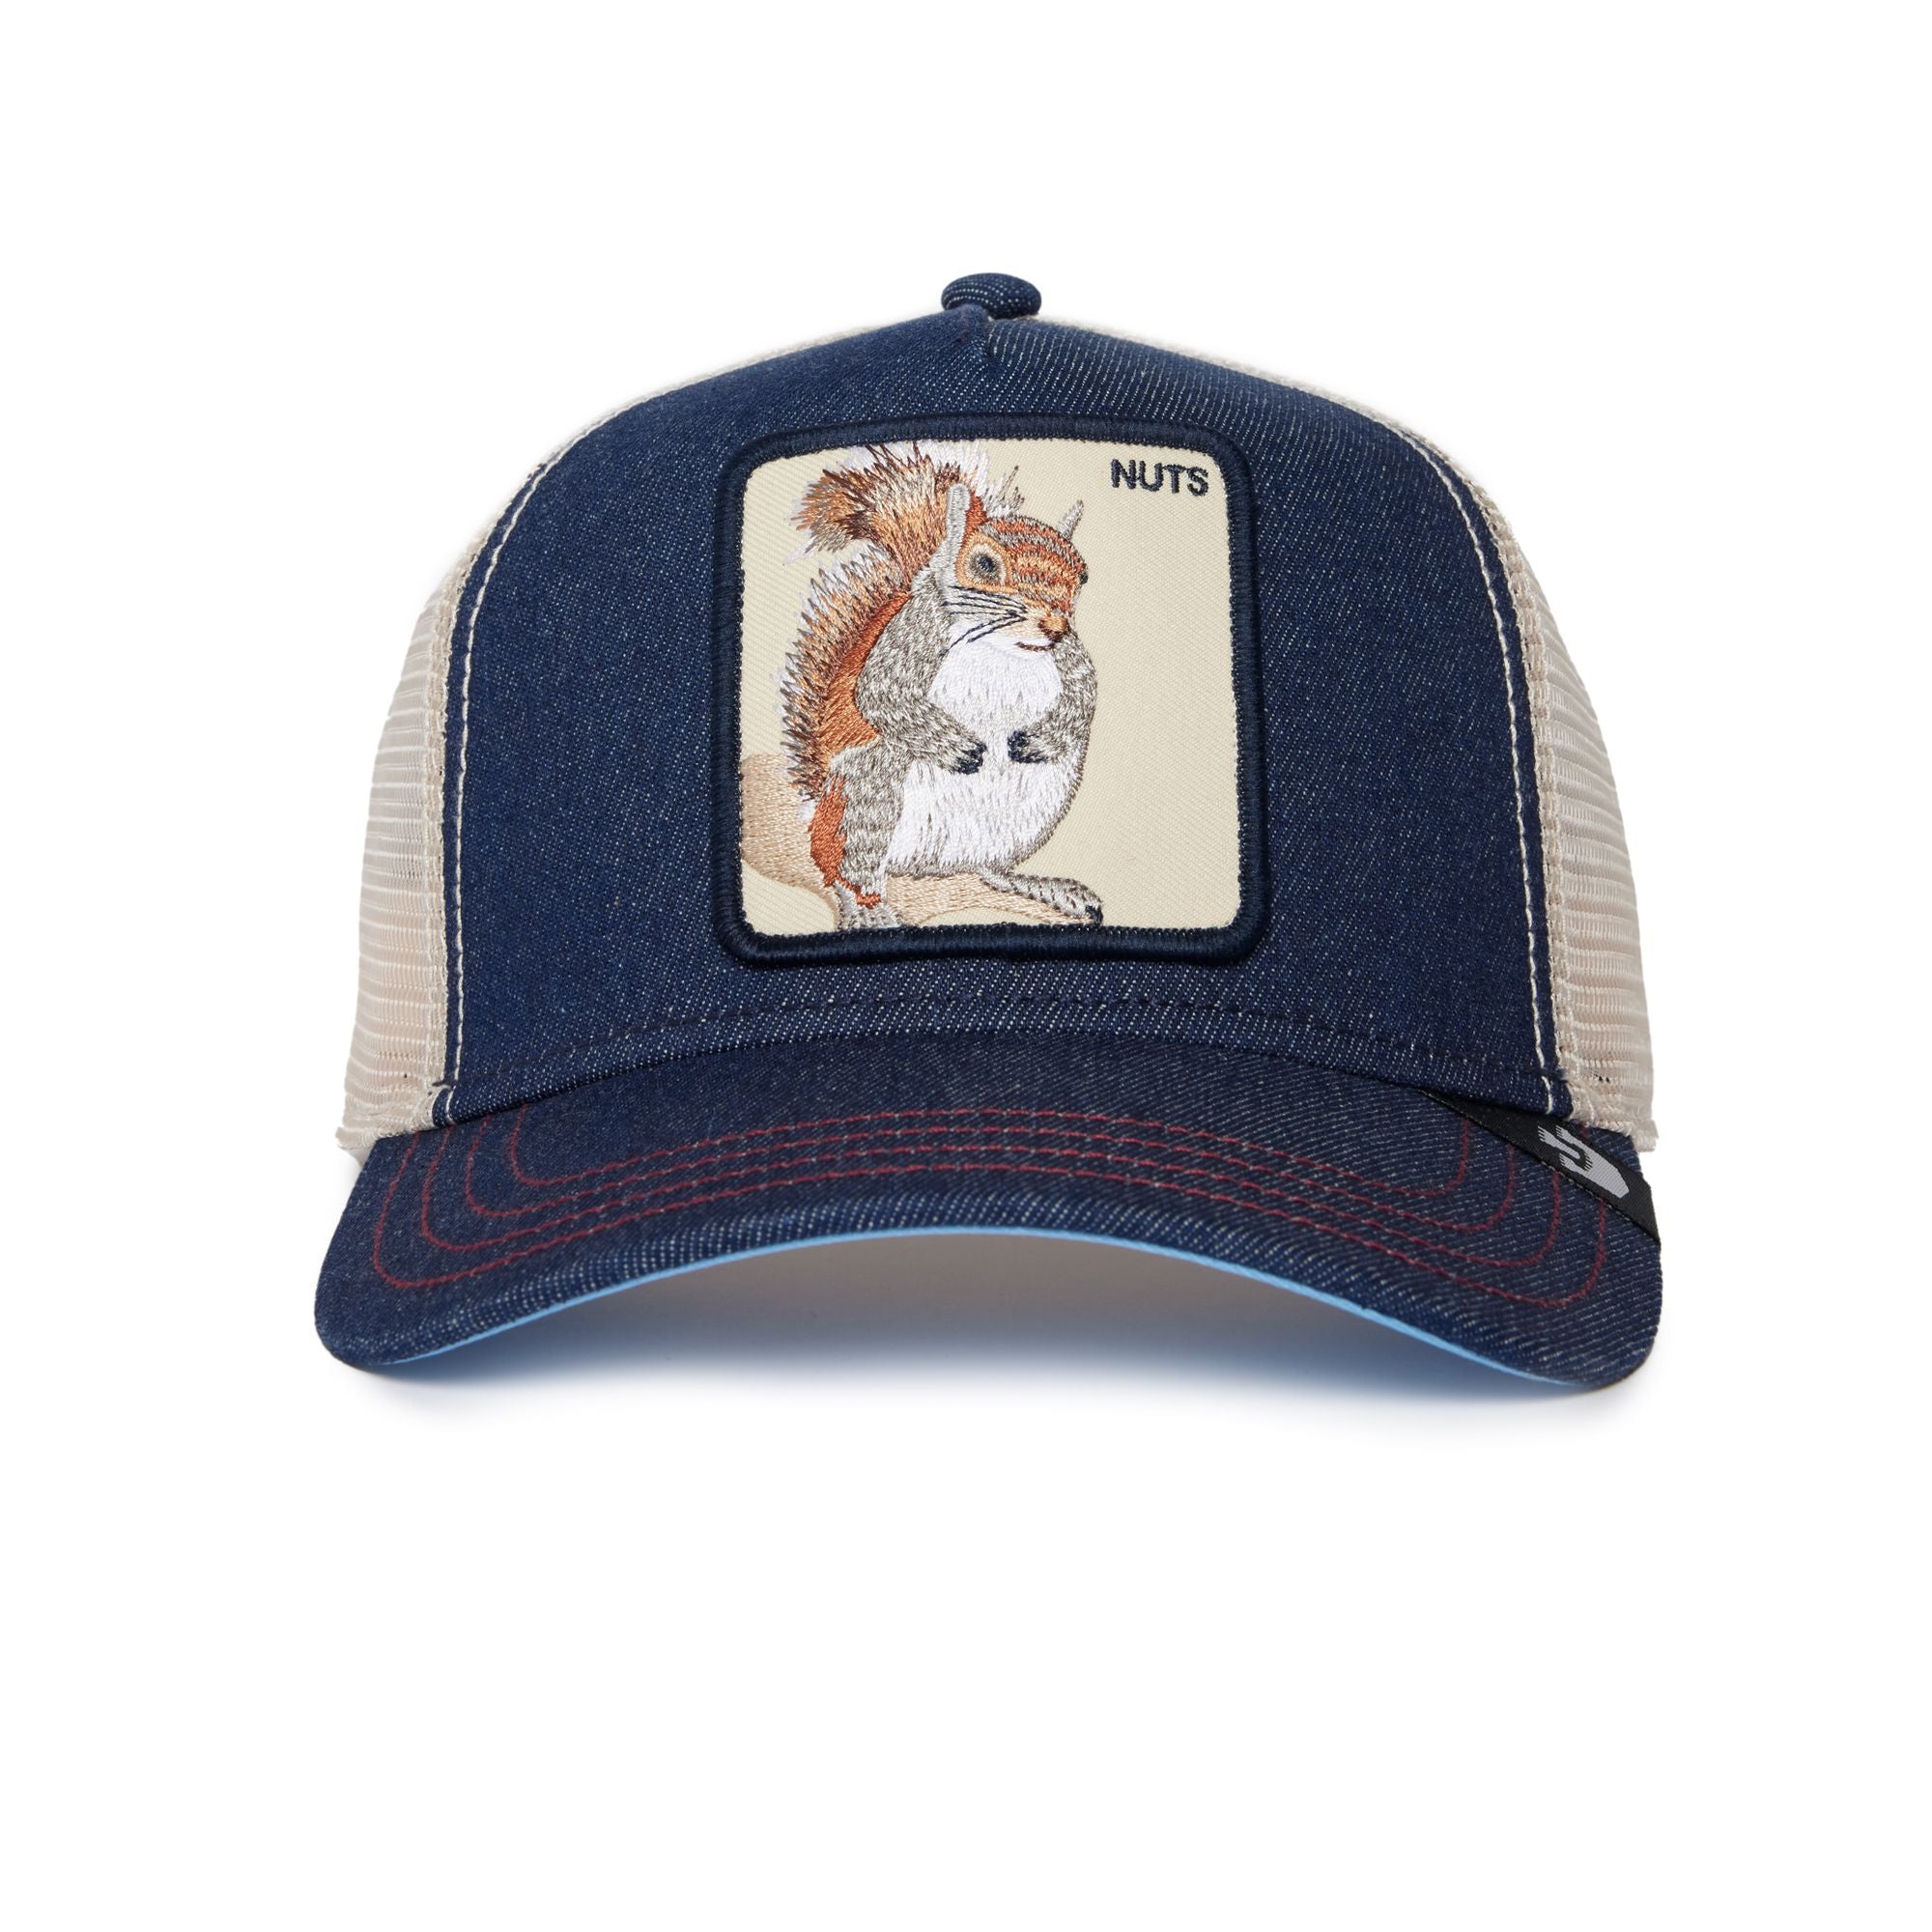 The Nuts Squirrel - Navy